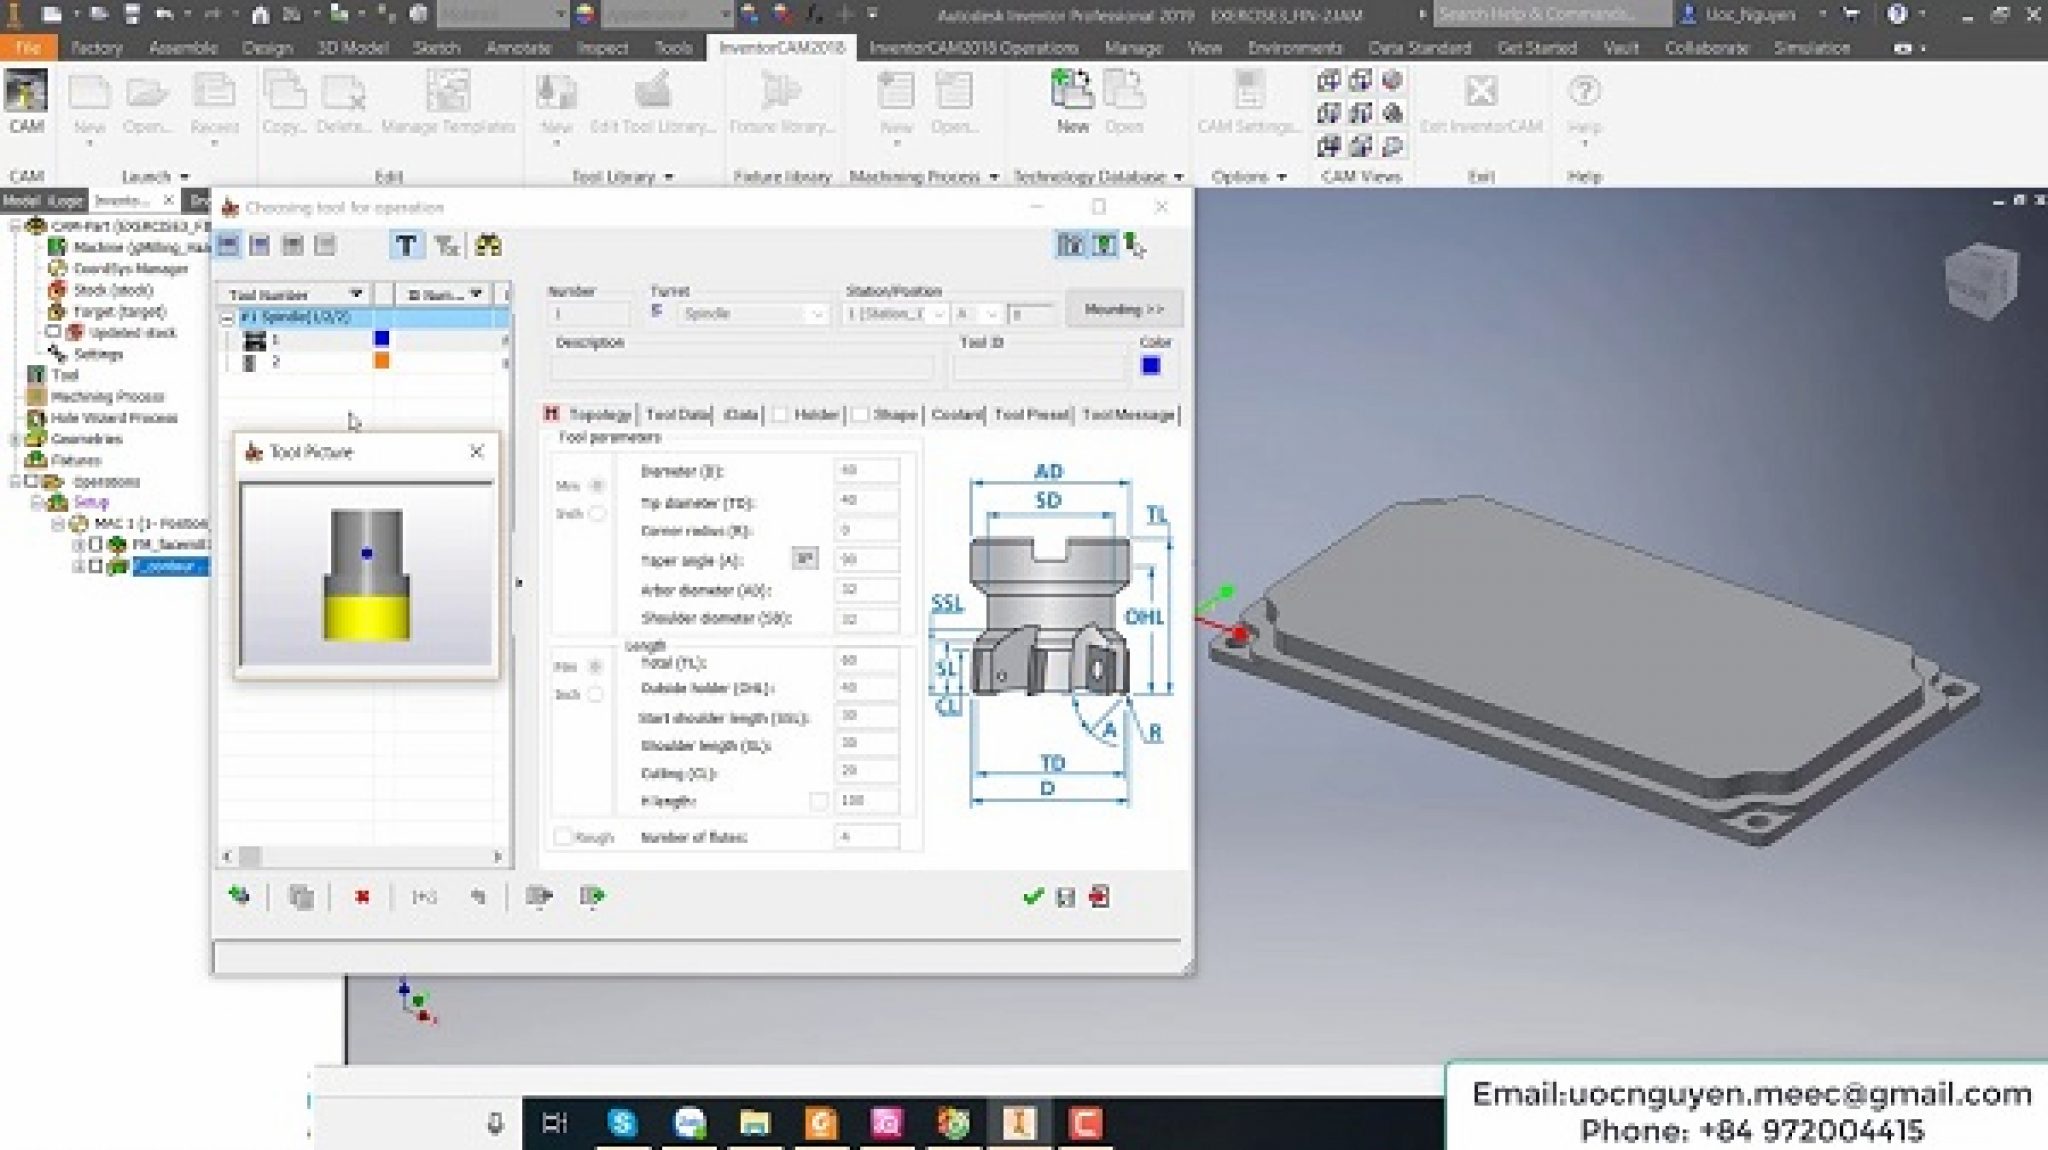 solidcam free download